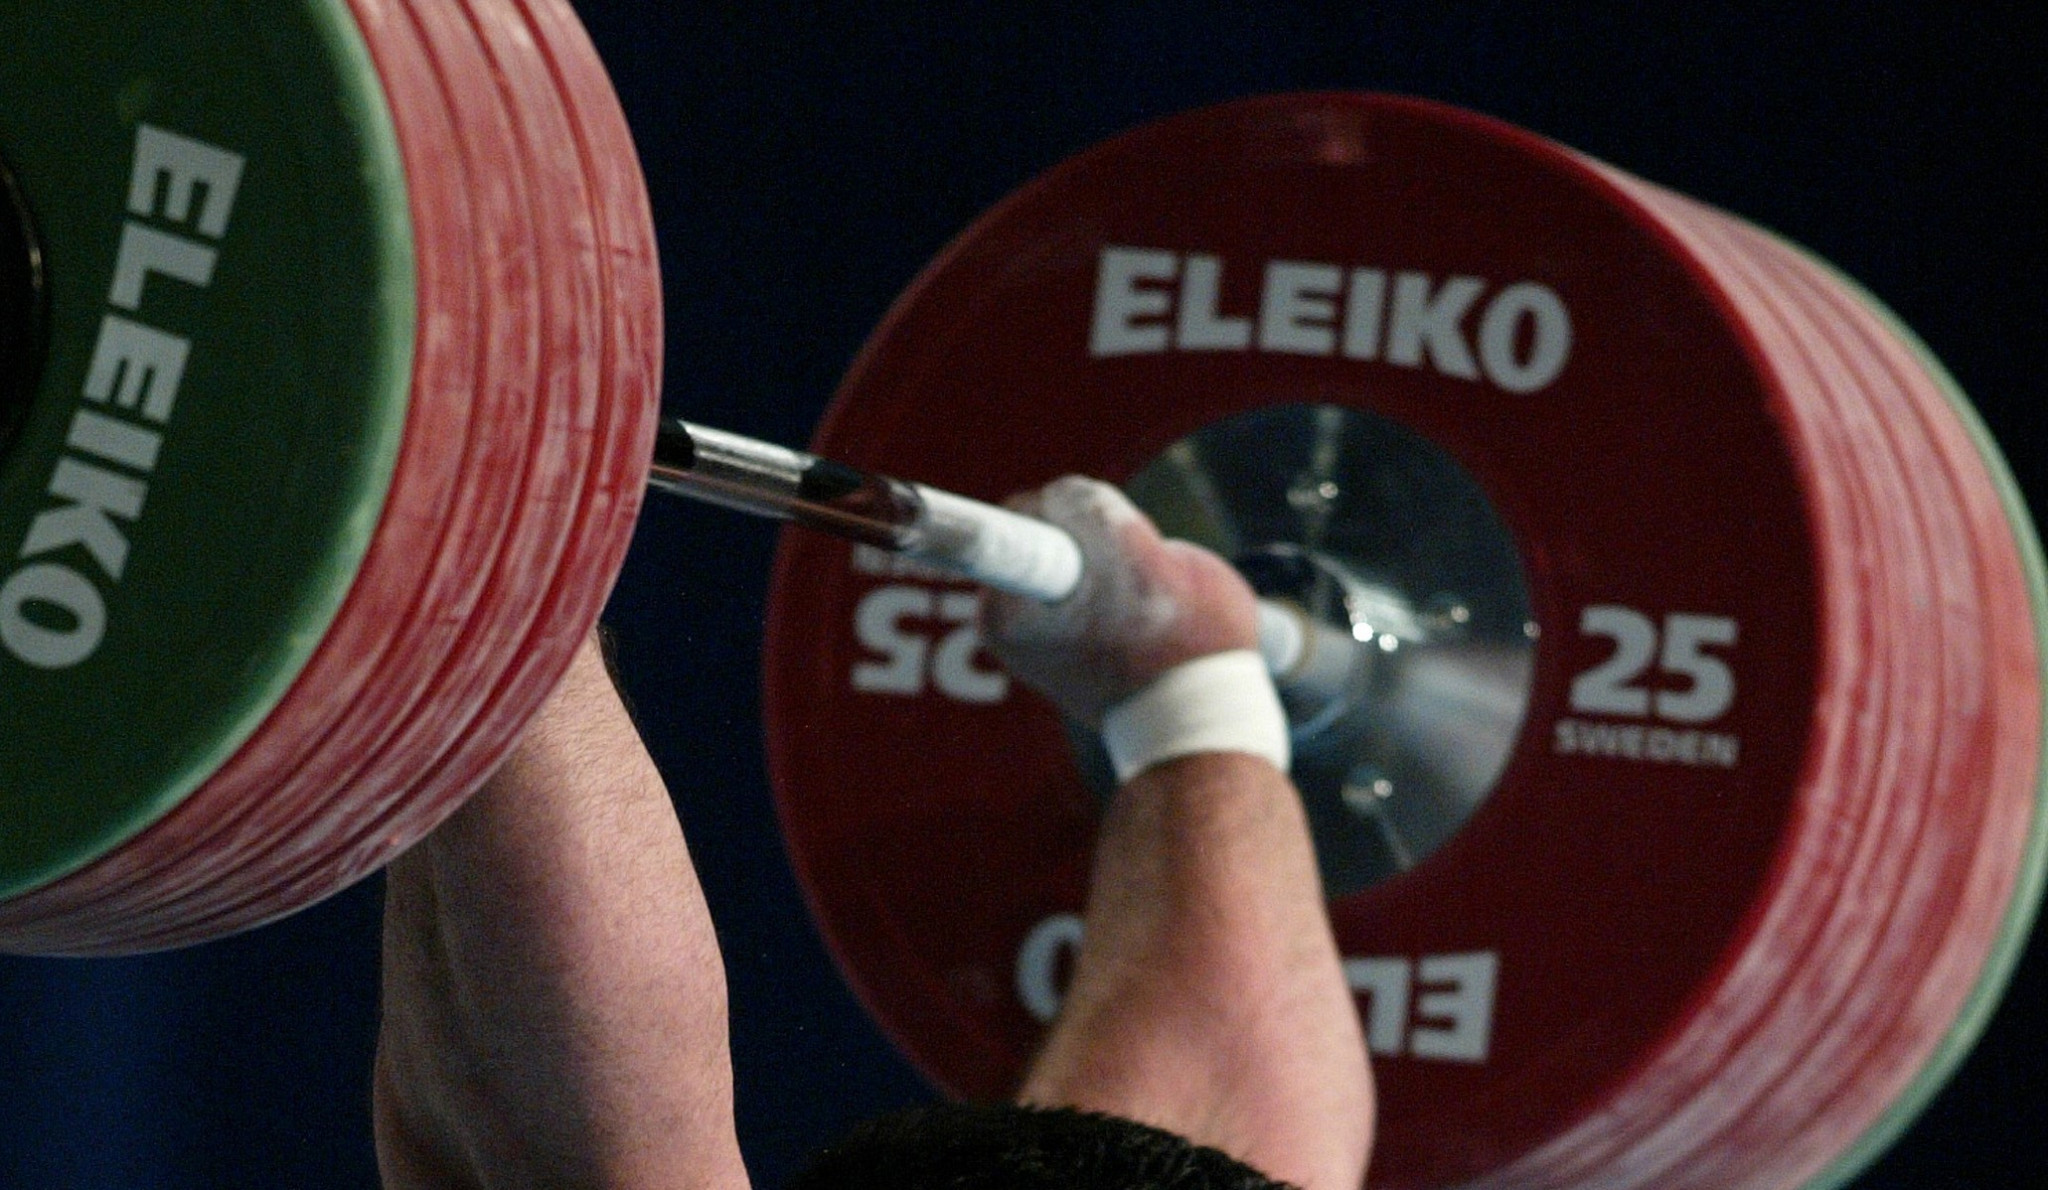 The under-55 kilograms disciplines were among the categories decided on the second day of the European Weightlifting Championships ©Getty Images